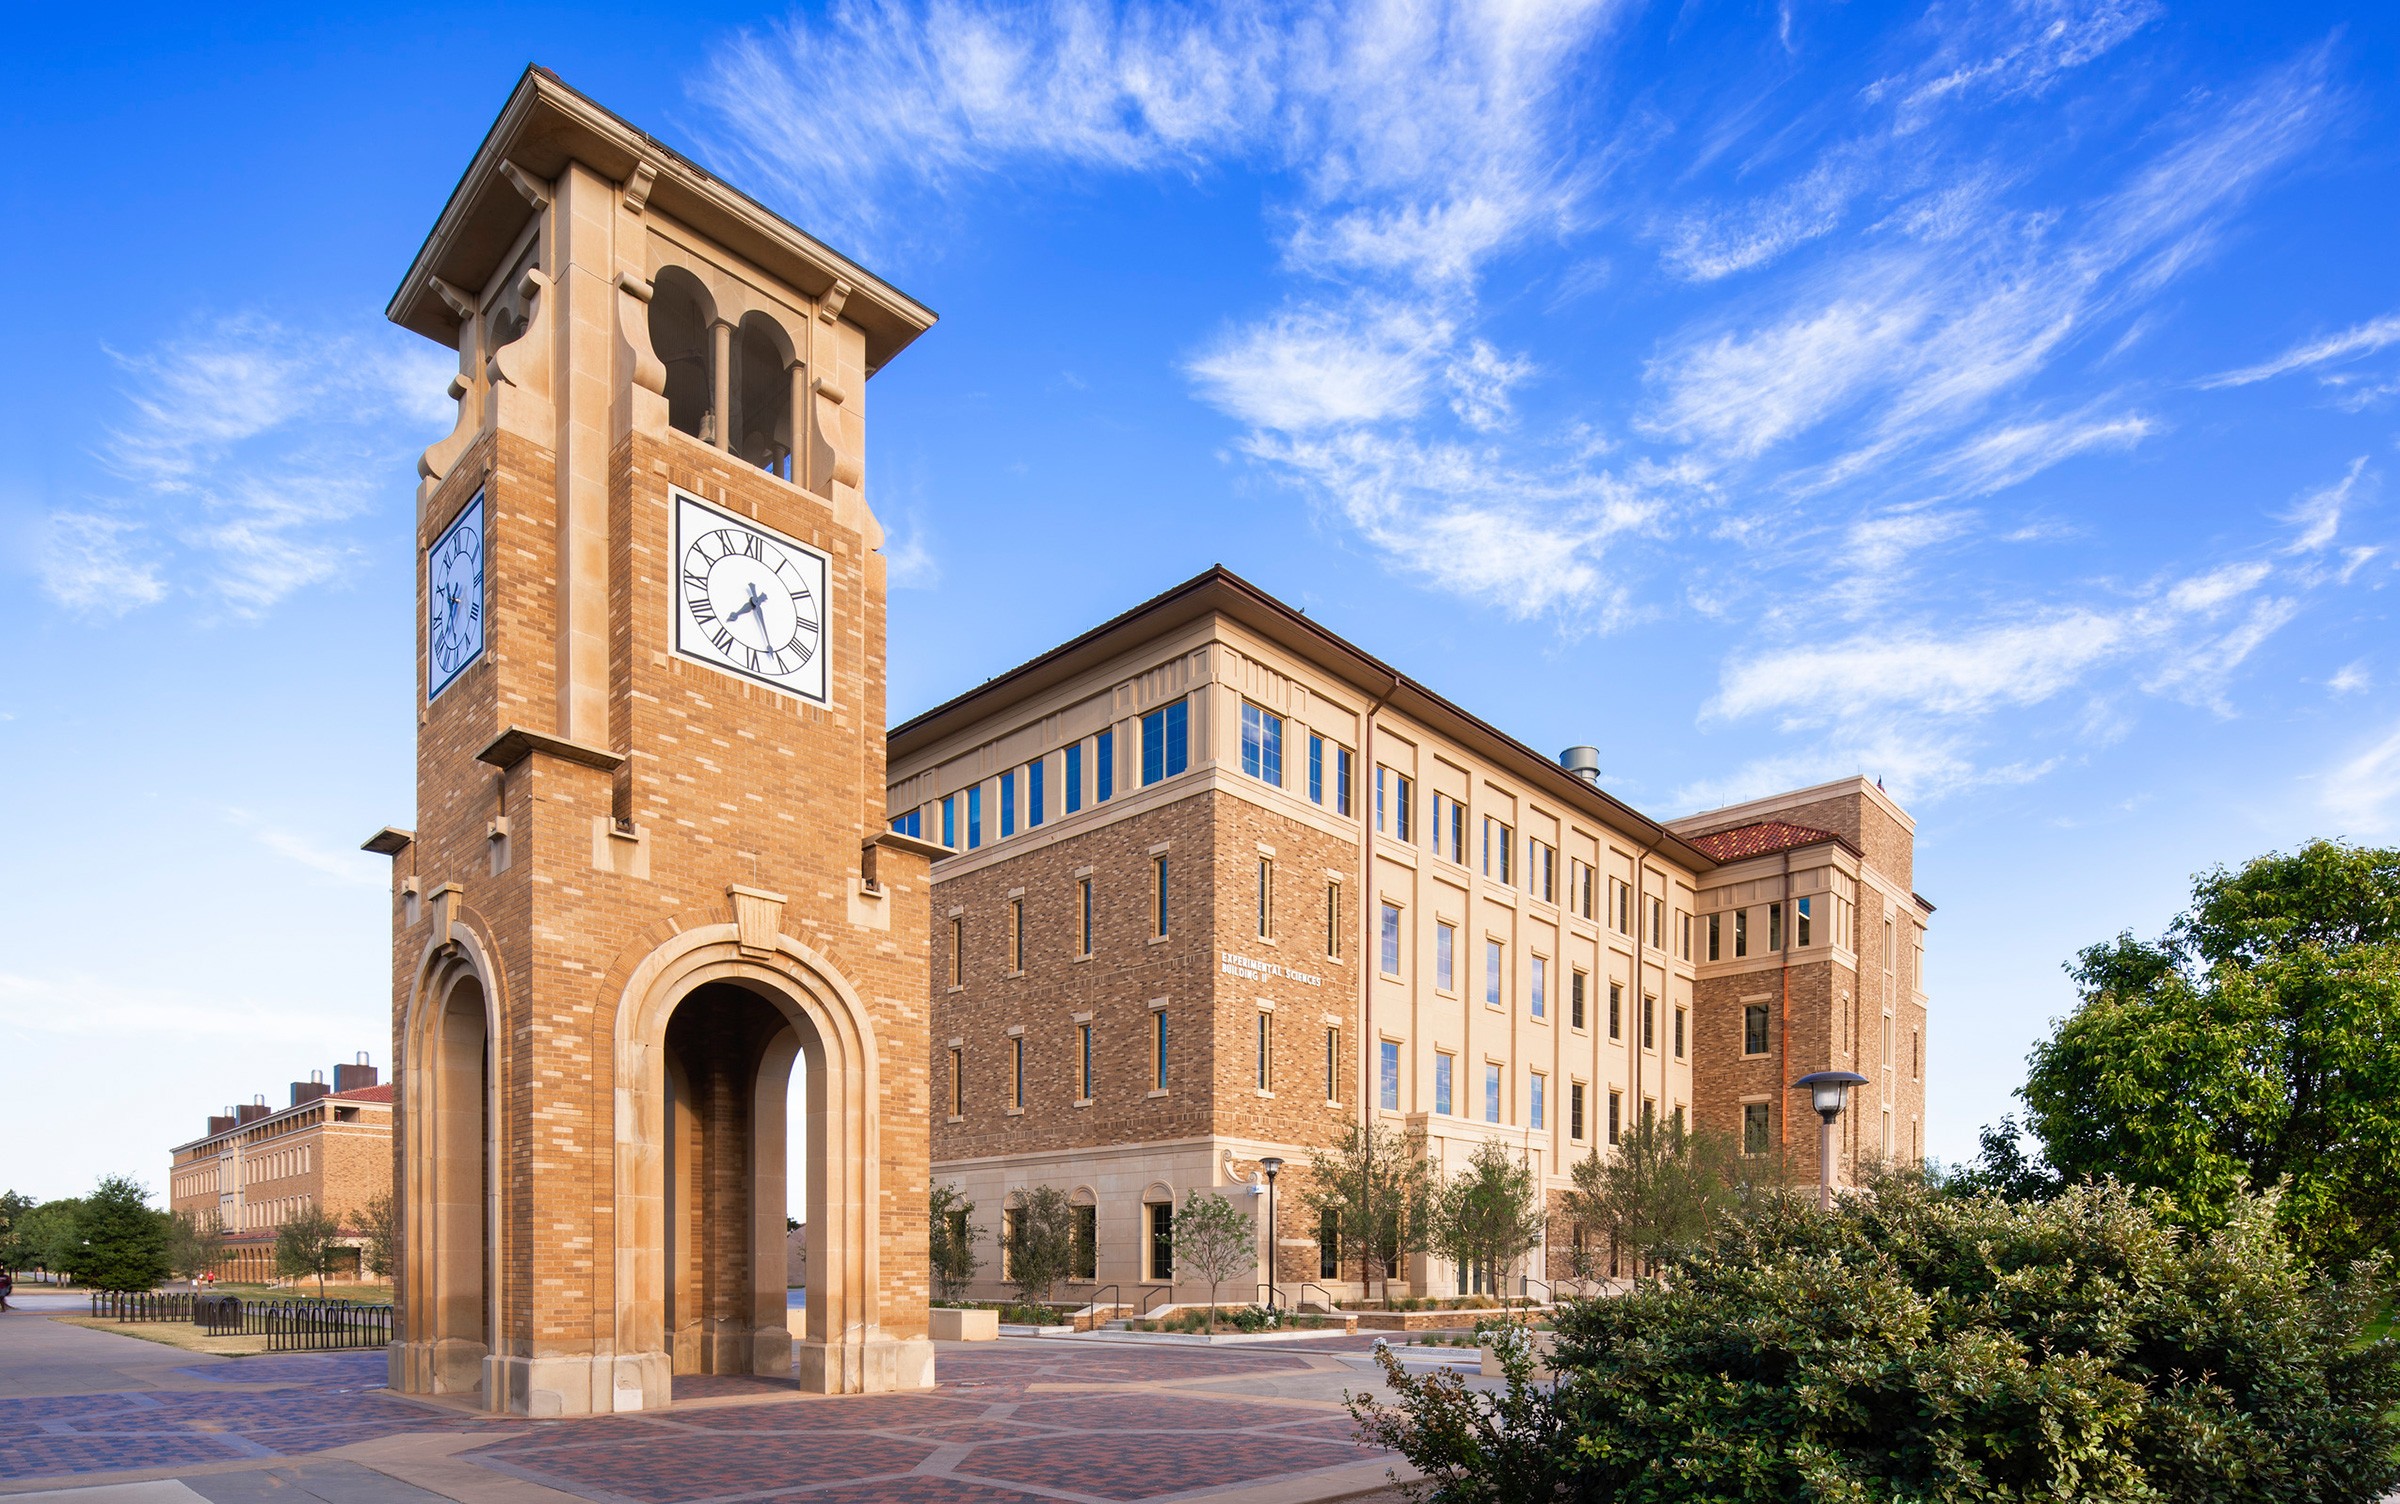 Exterior daylight image of the Texas Tech University Experiential Sciences Building with clocktower in the foreground